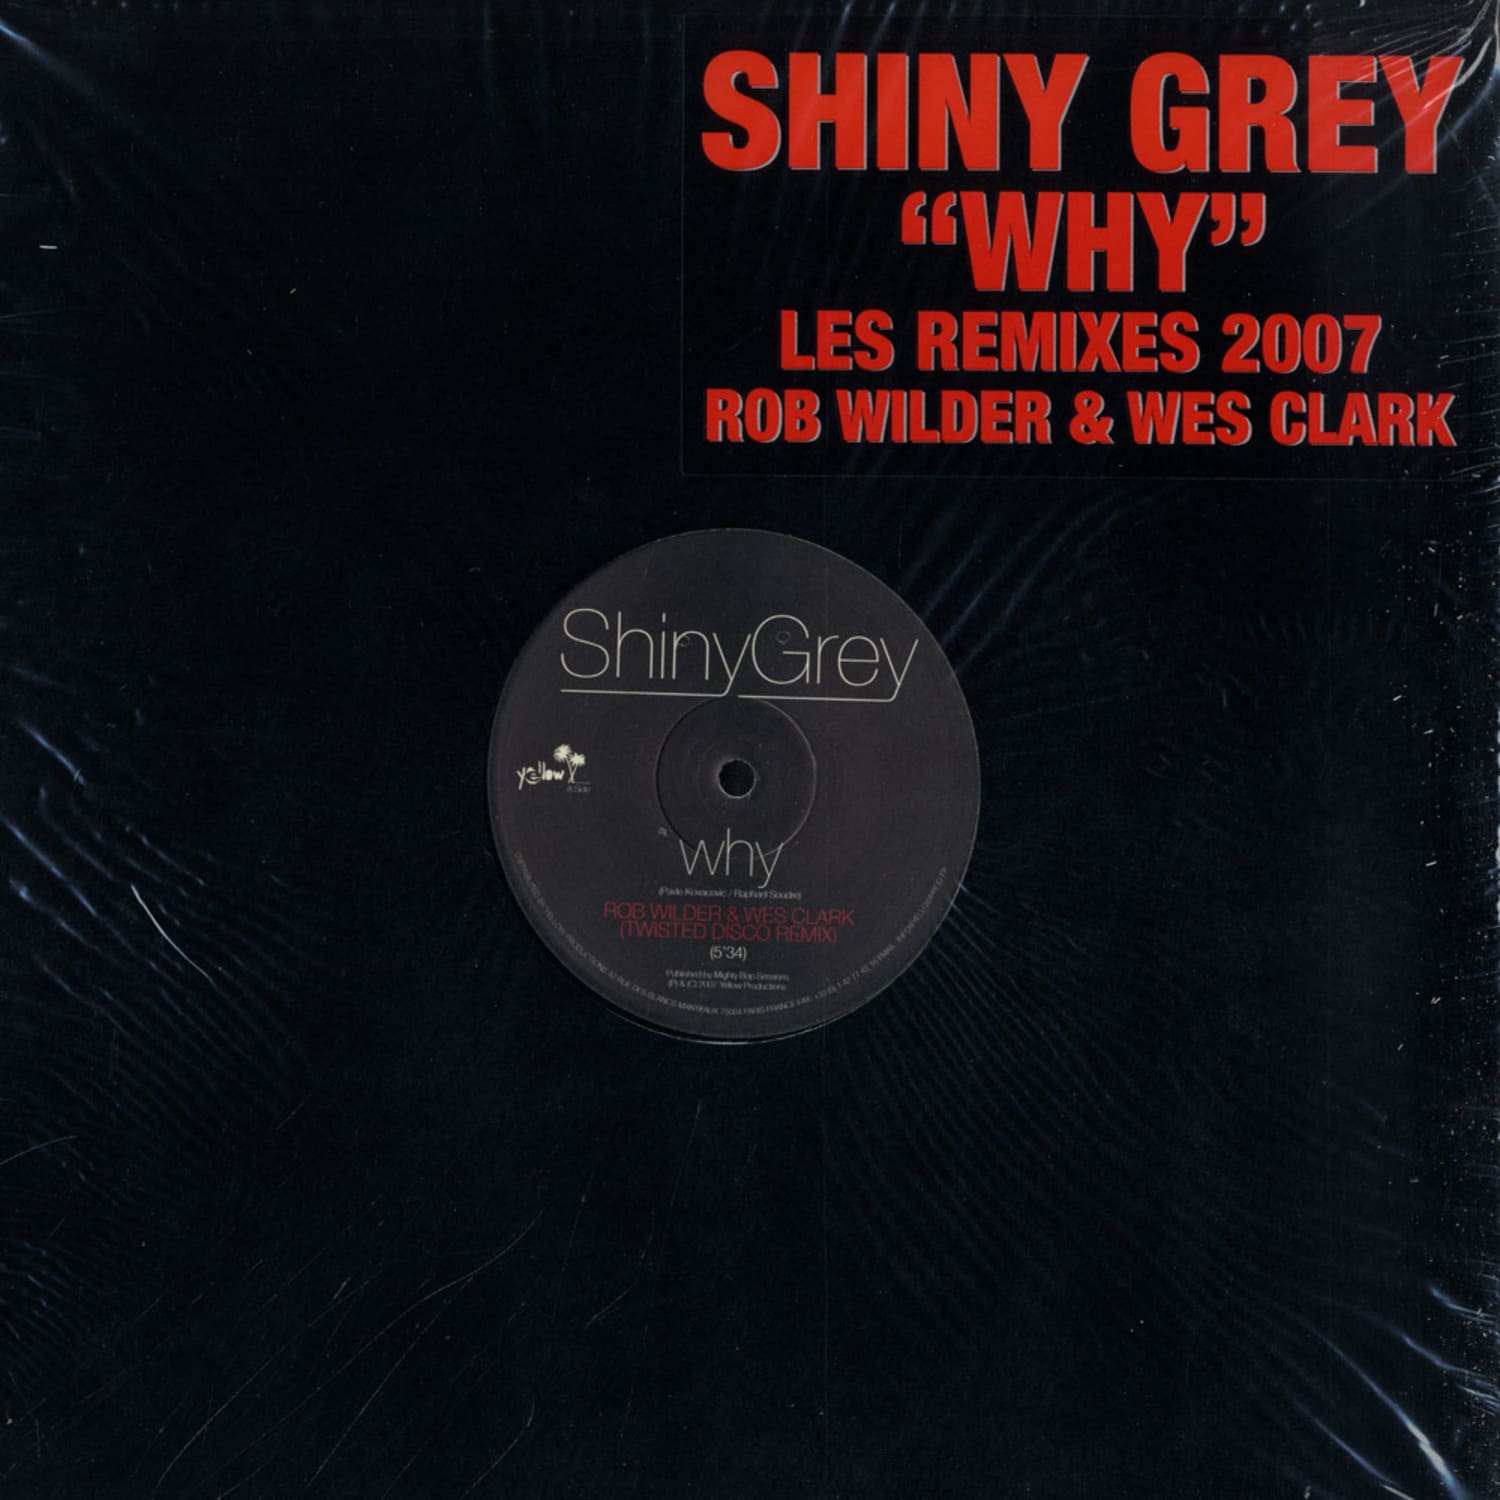 Shiny Grey - WHY - THE 2007 REMIXES